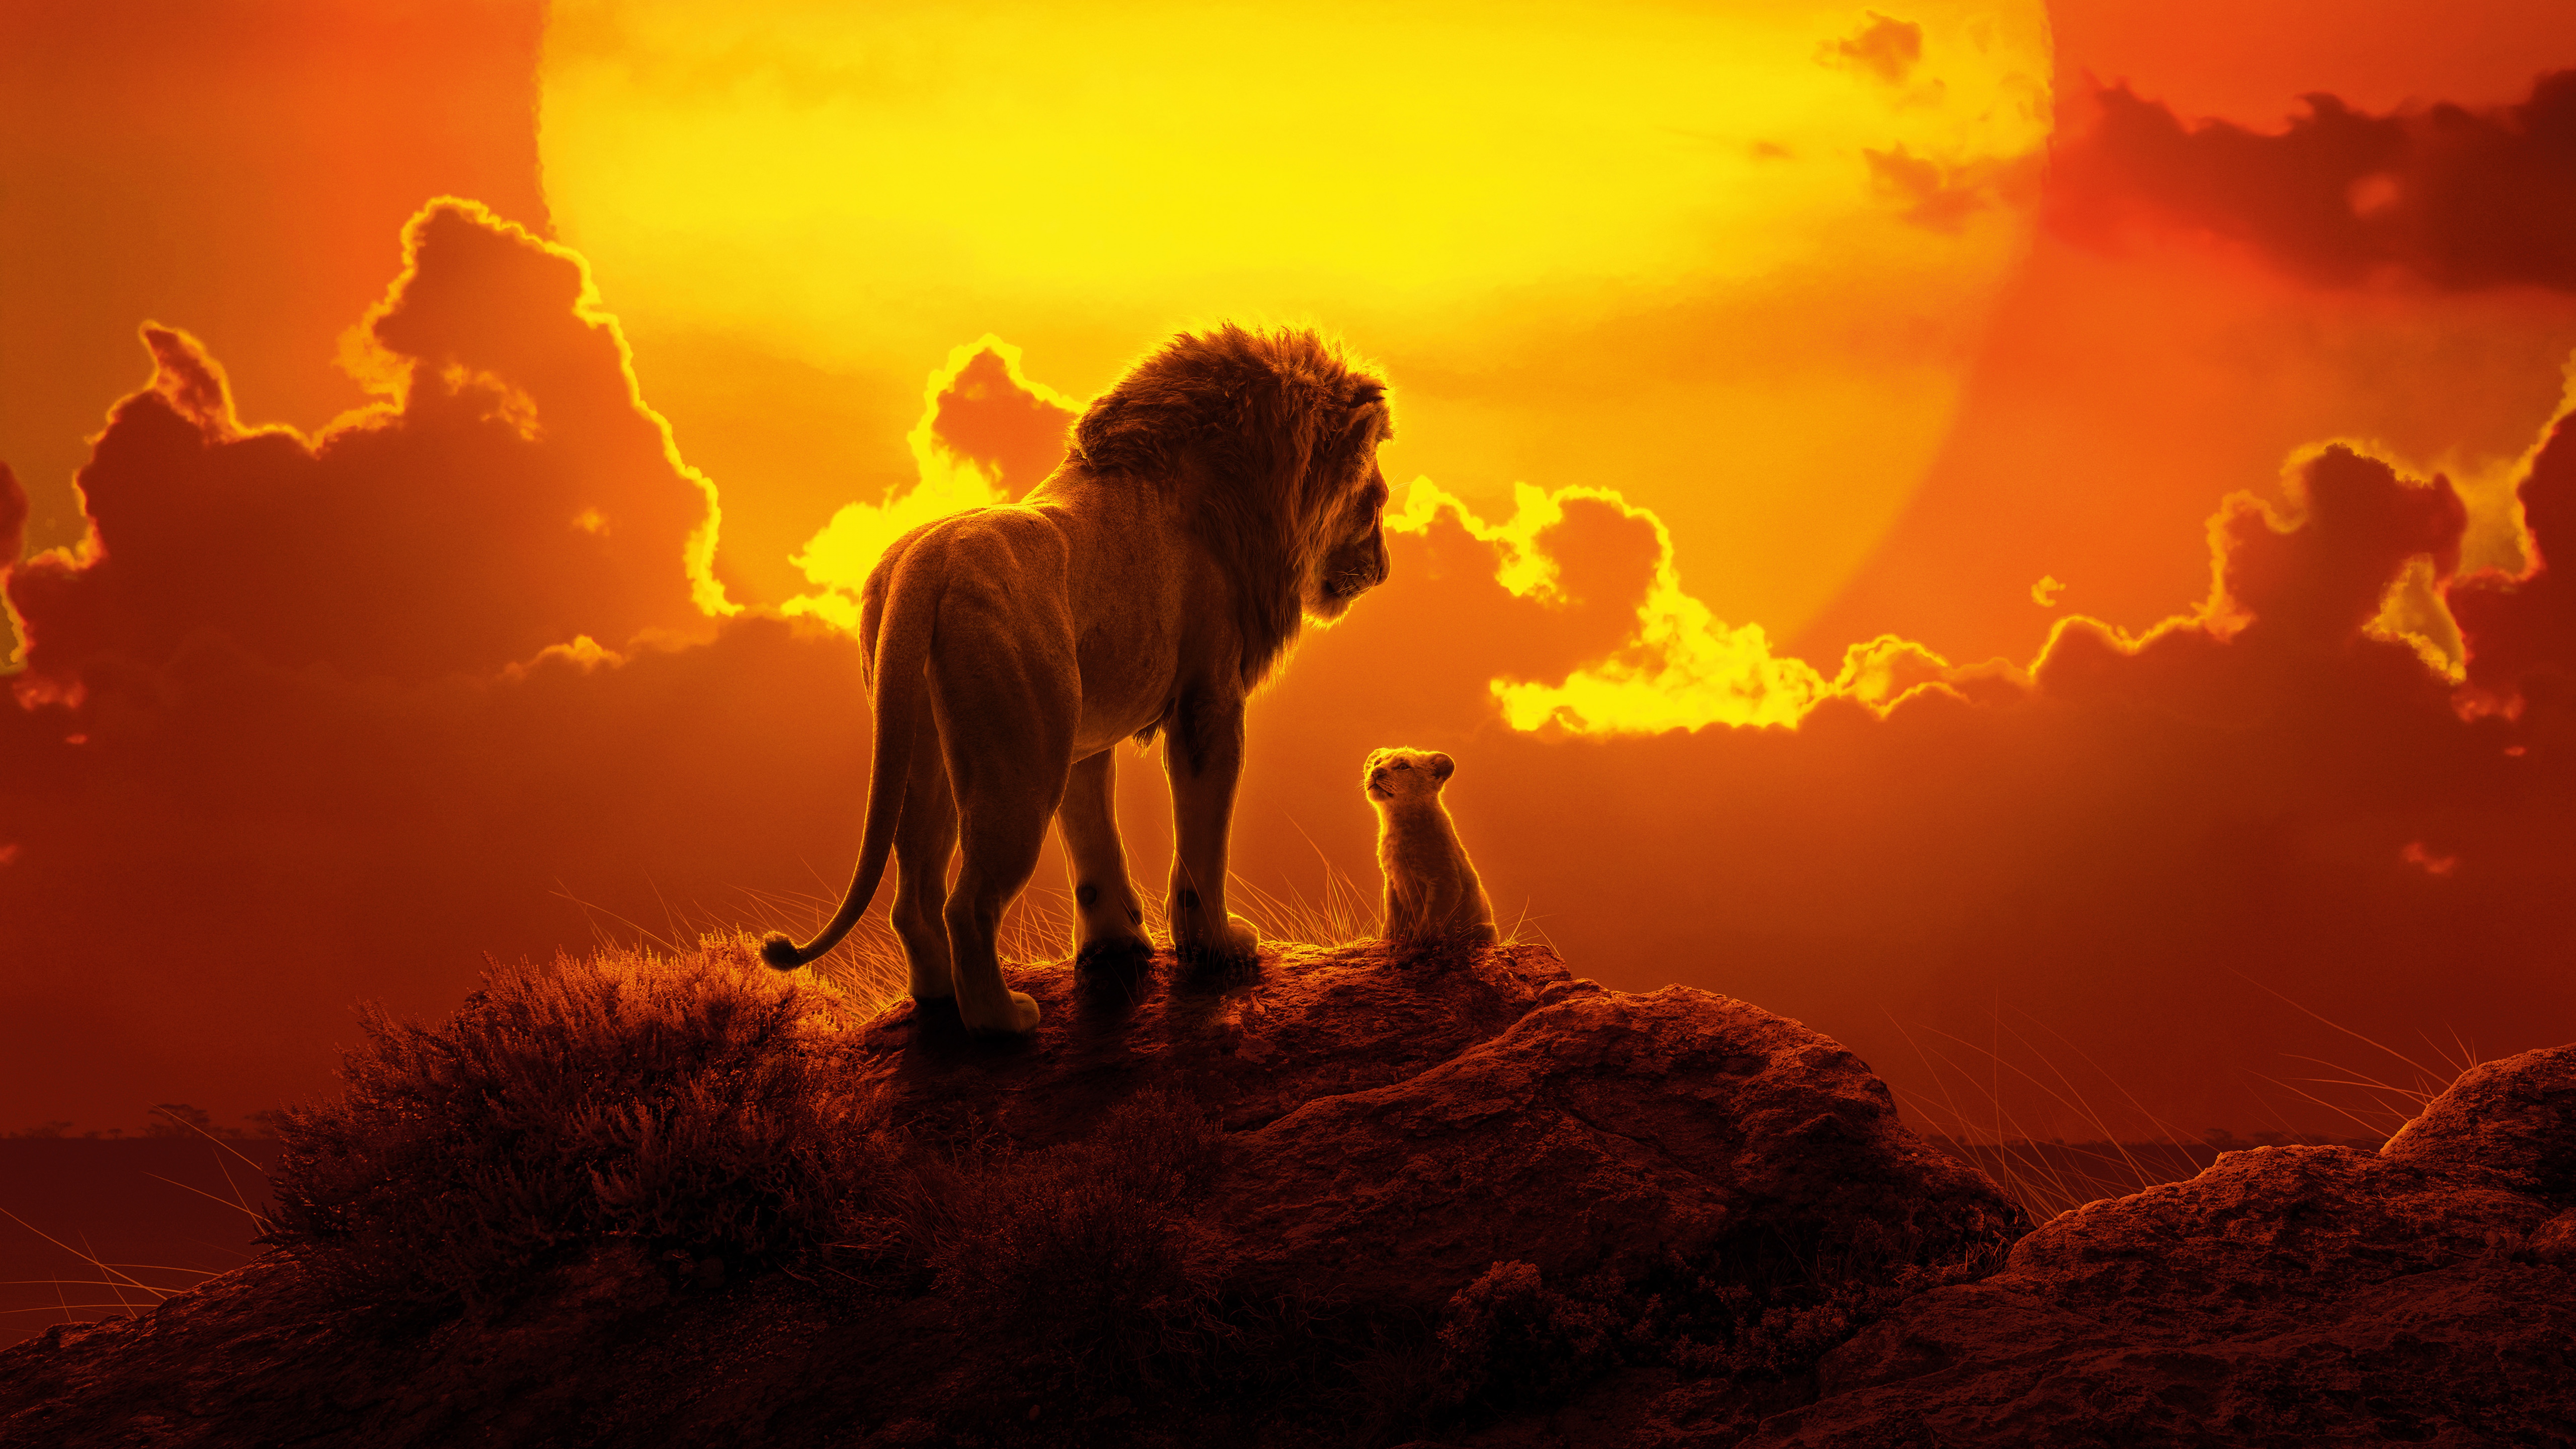 A lion and its cub stand on a hillside at sunset. - The Lion King